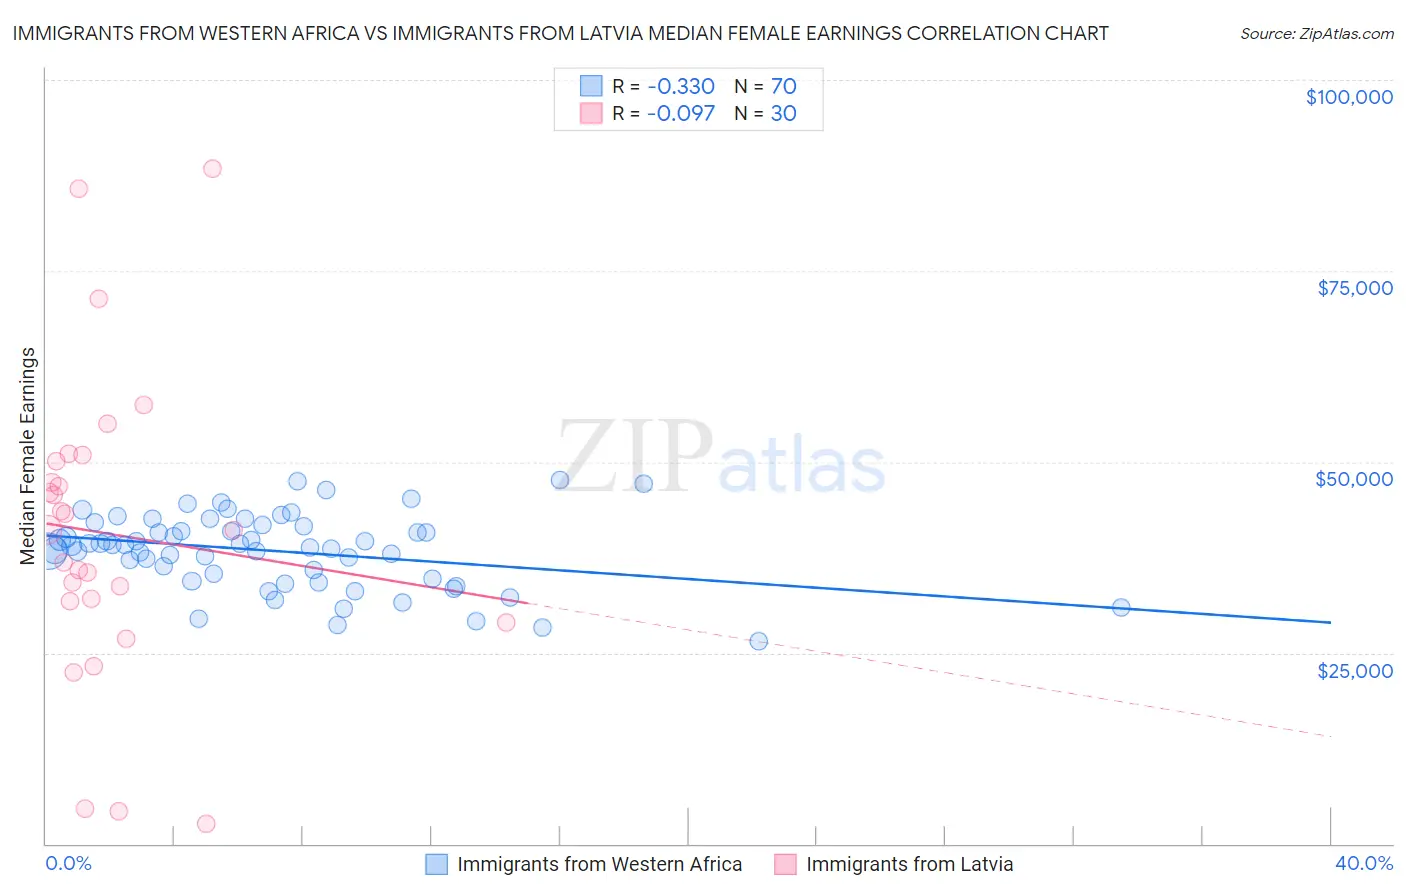 Immigrants from Western Africa vs Immigrants from Latvia Median Female Earnings